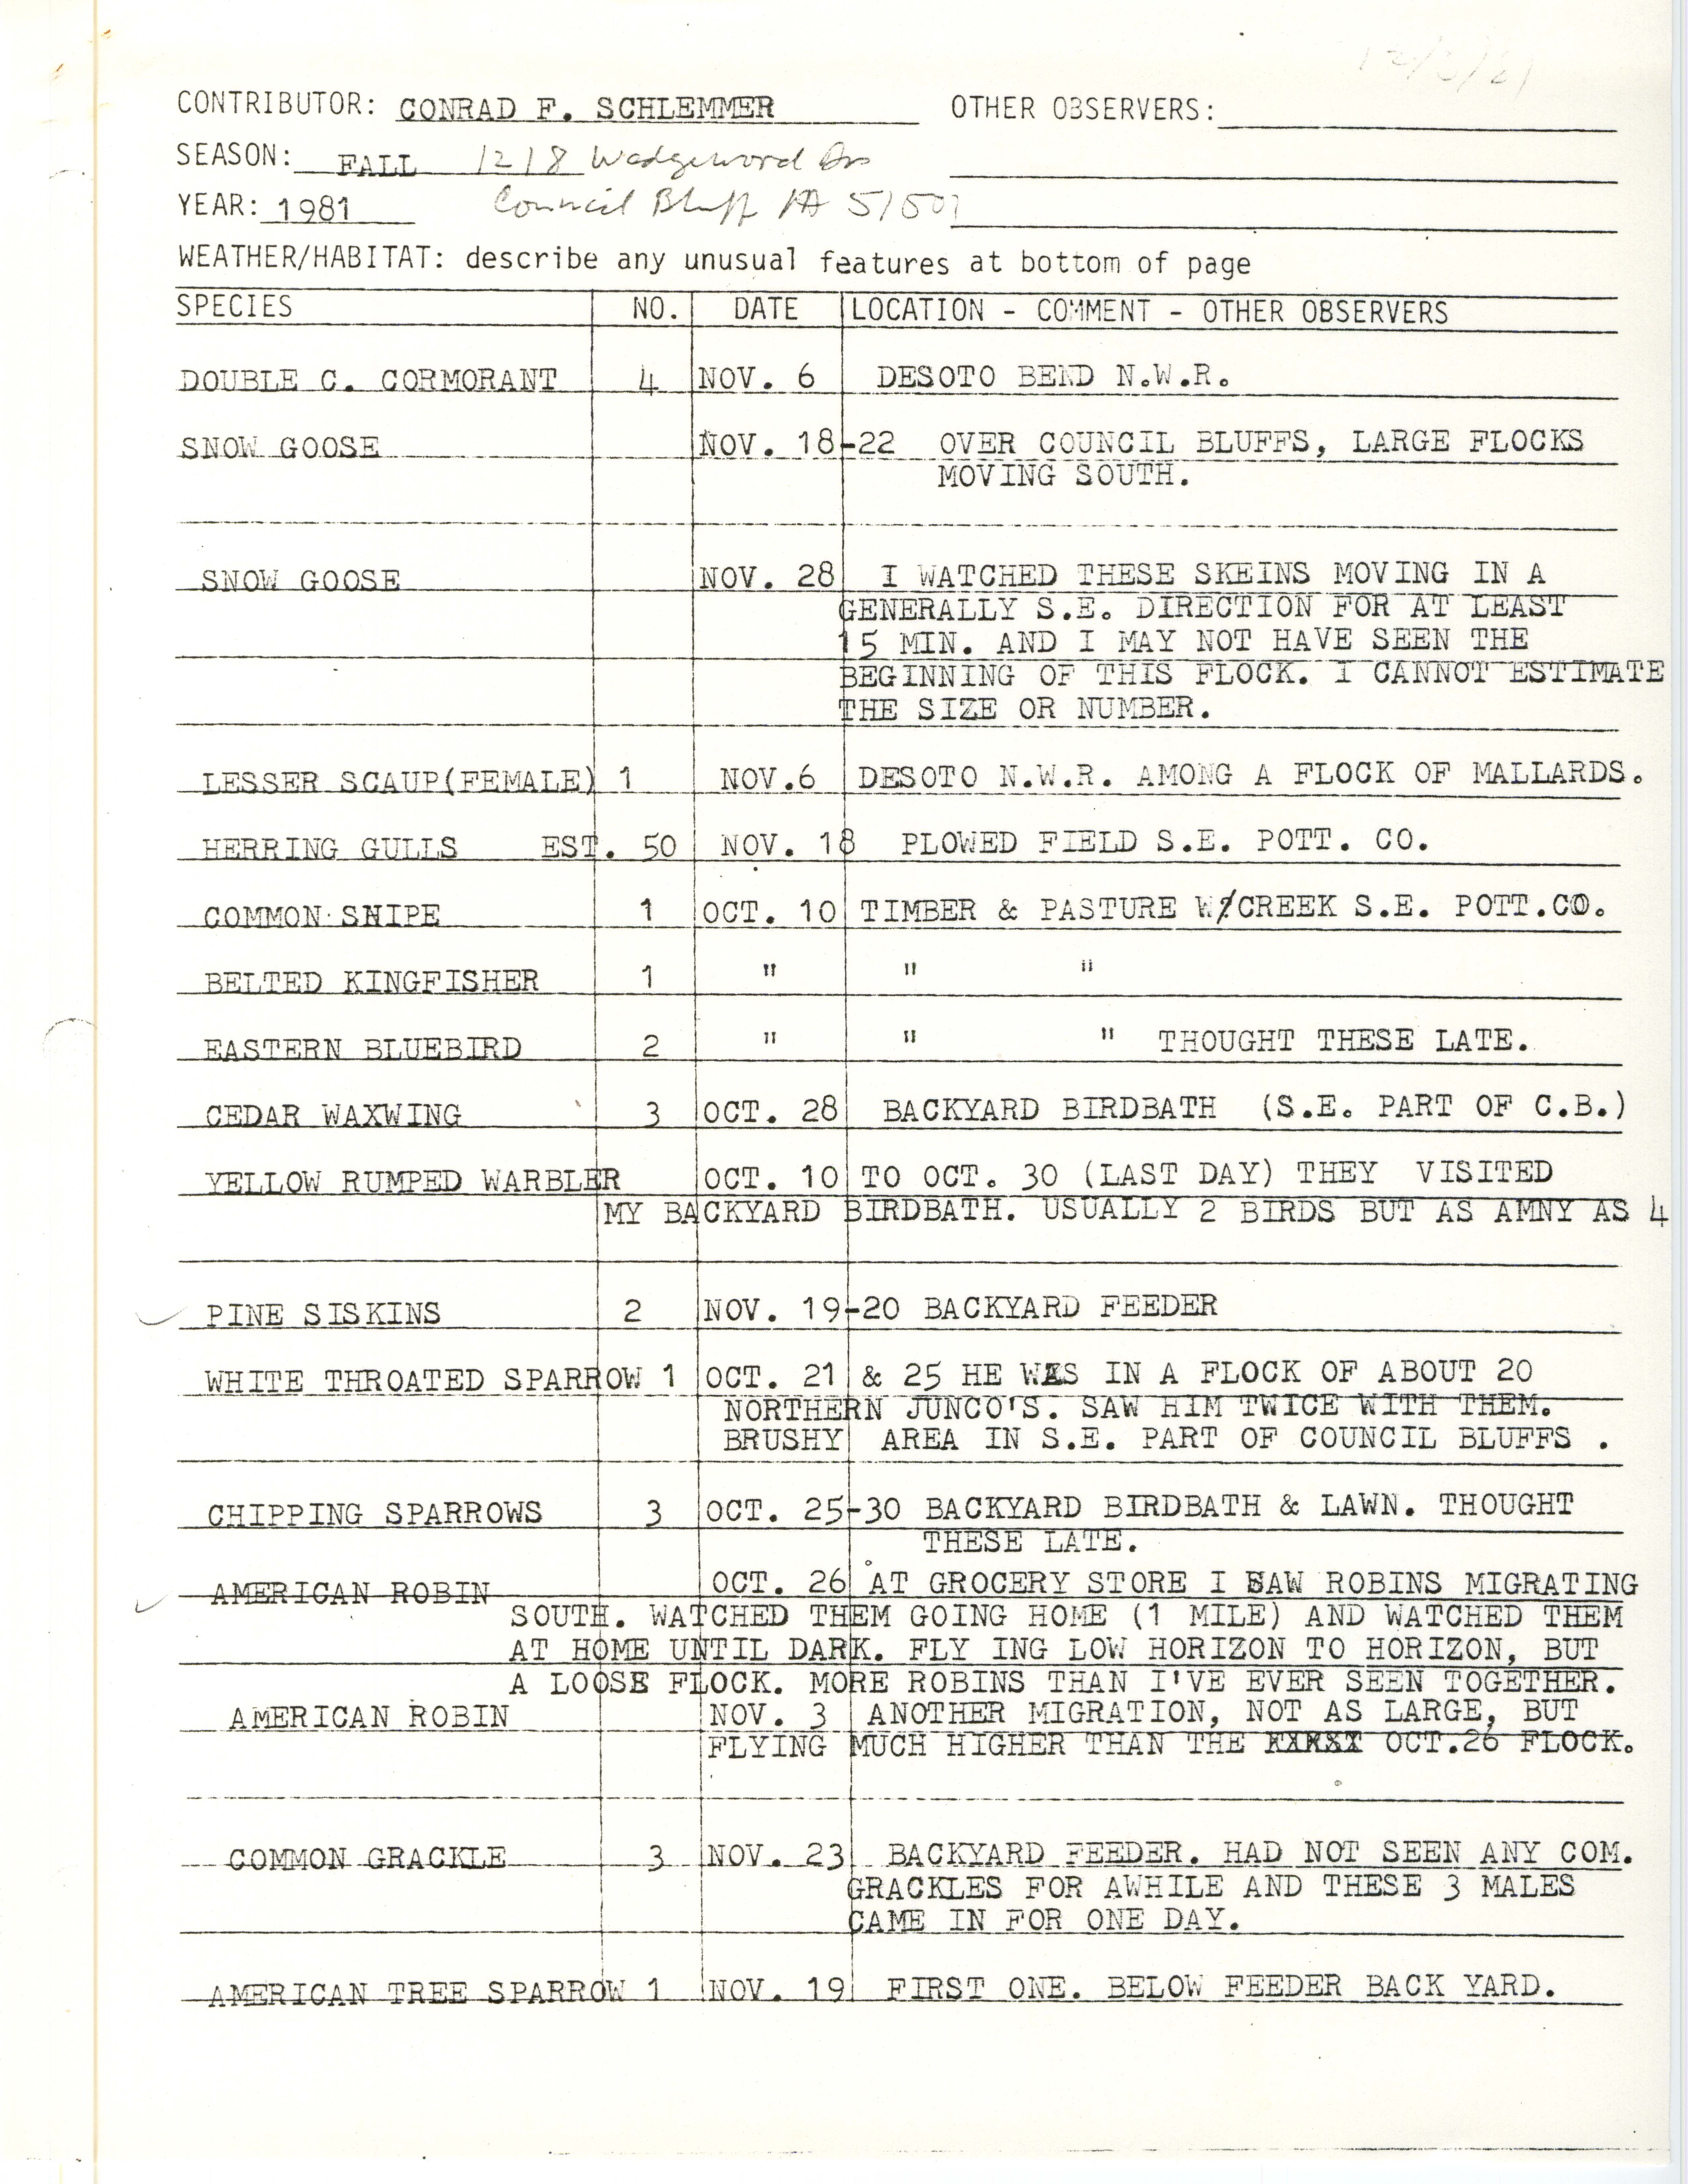 Field notes contributed by Conrad F. Schlemmer, fall 1981